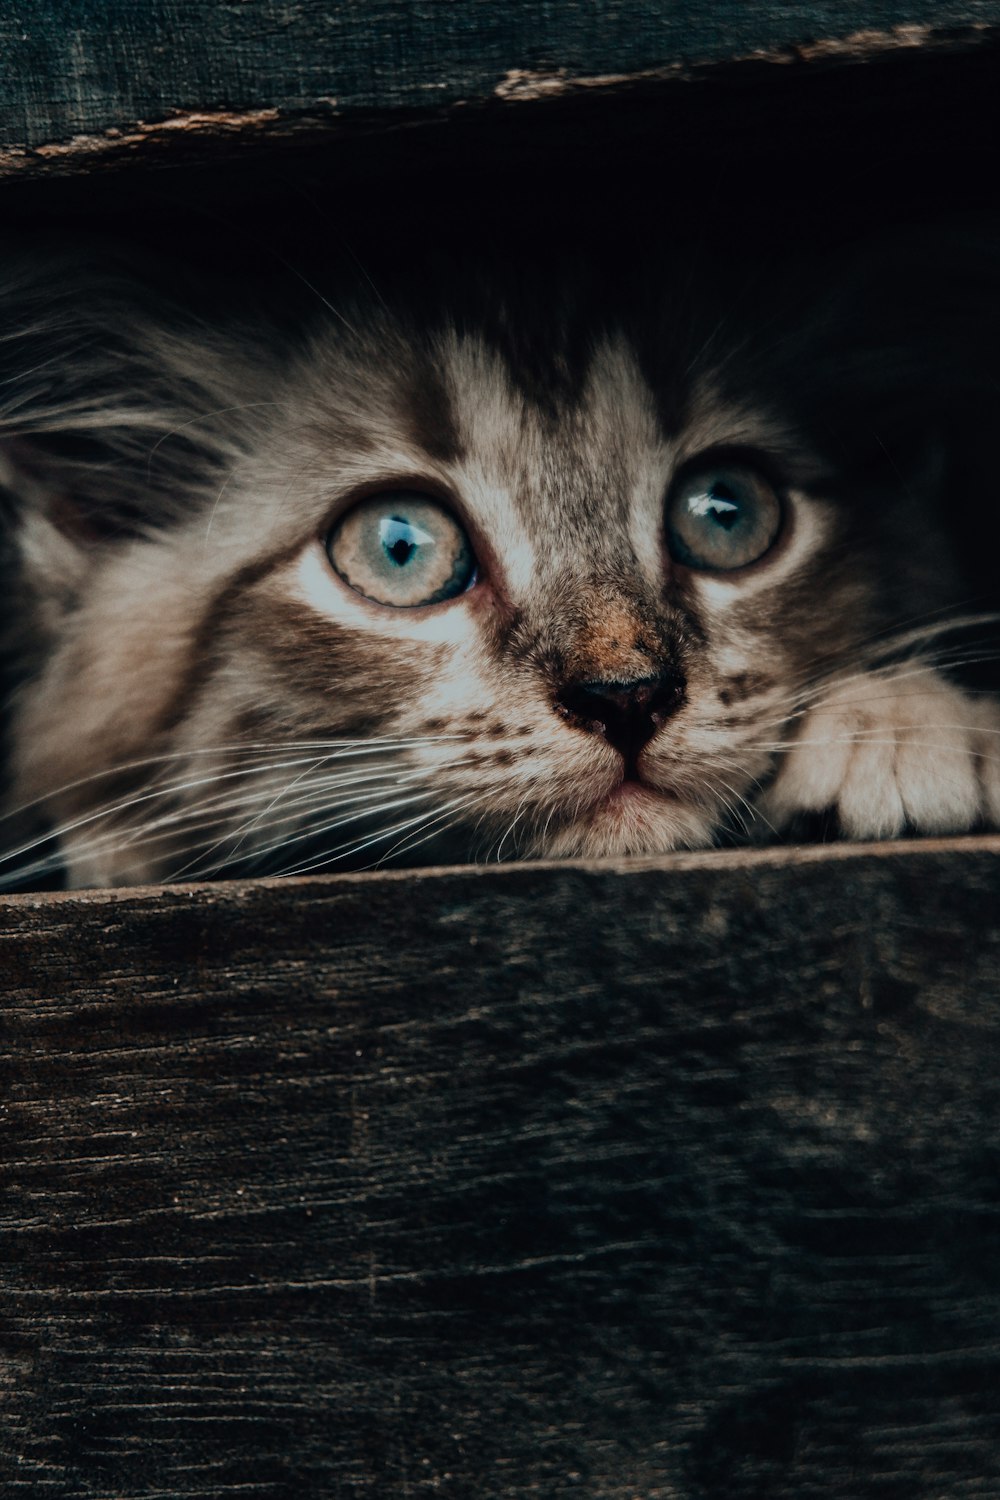 a cat with blue eyes peeking out of a wooden box